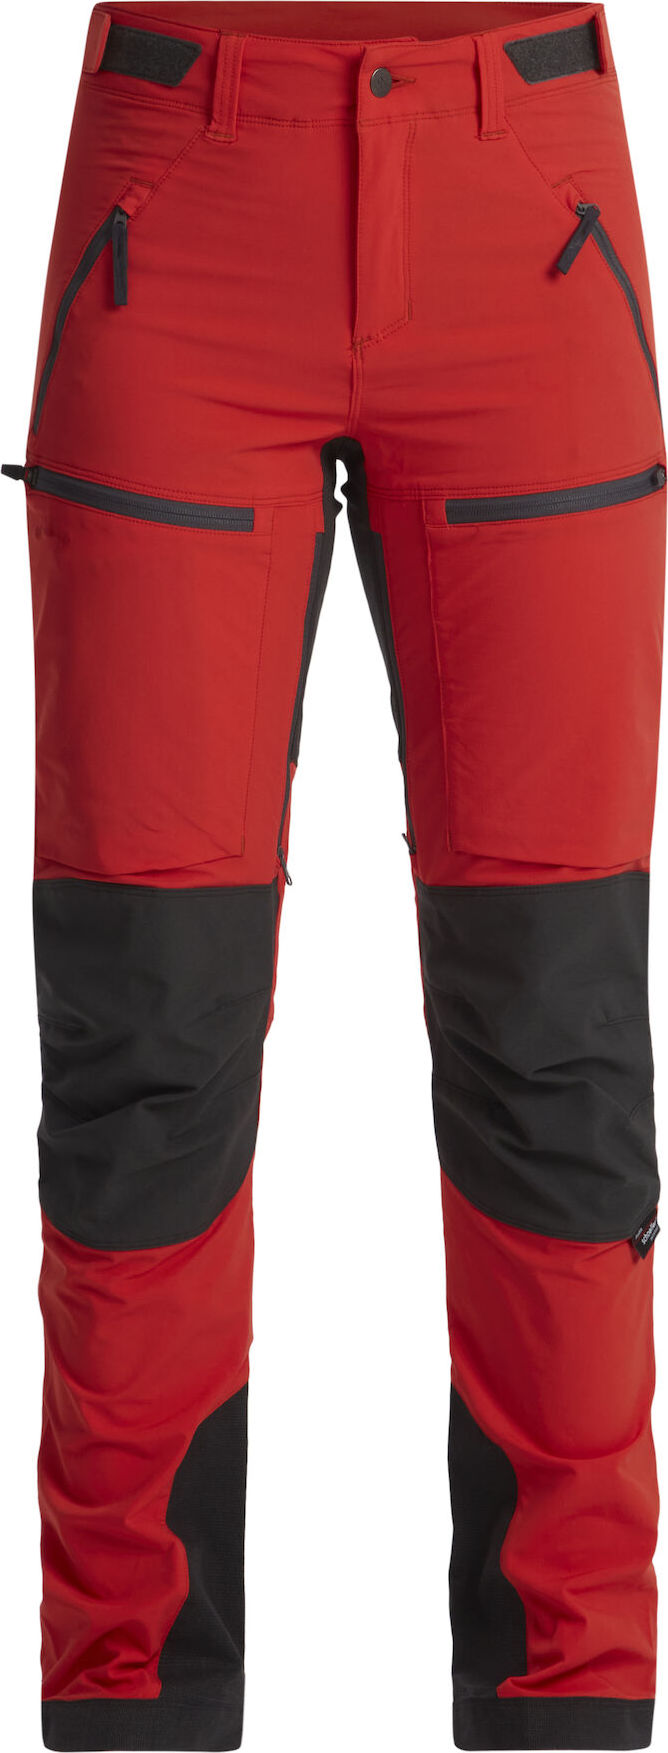 Women’s Askro Pro Pant Lively Red/Charcoal